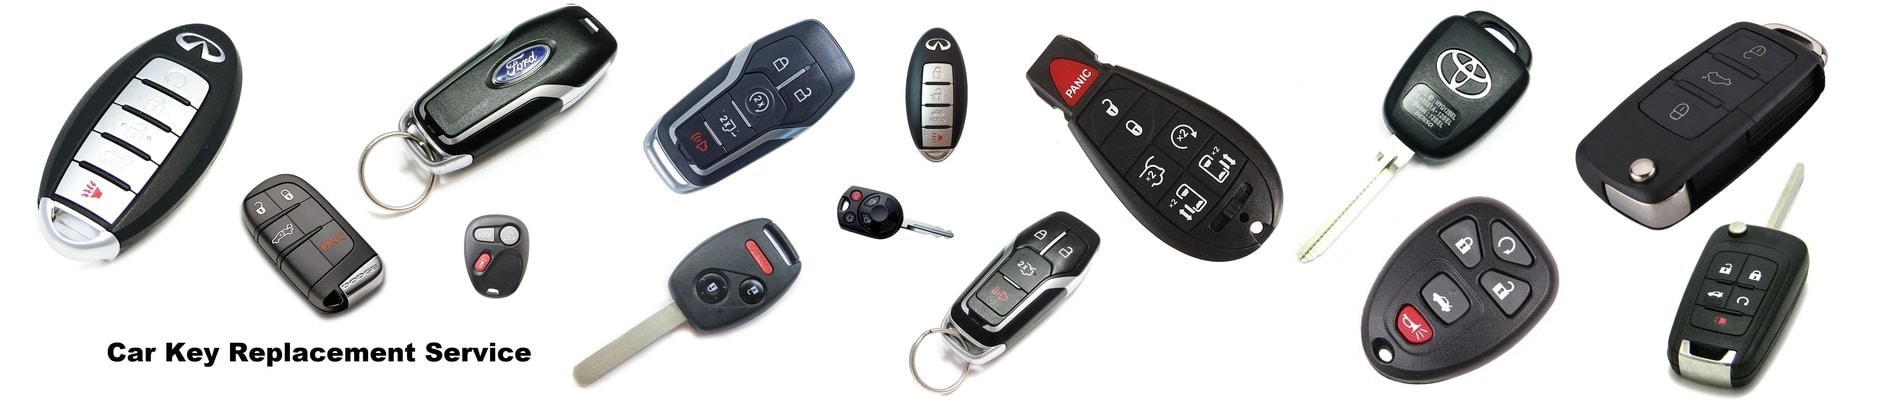 Car door unlocking and key replacement services